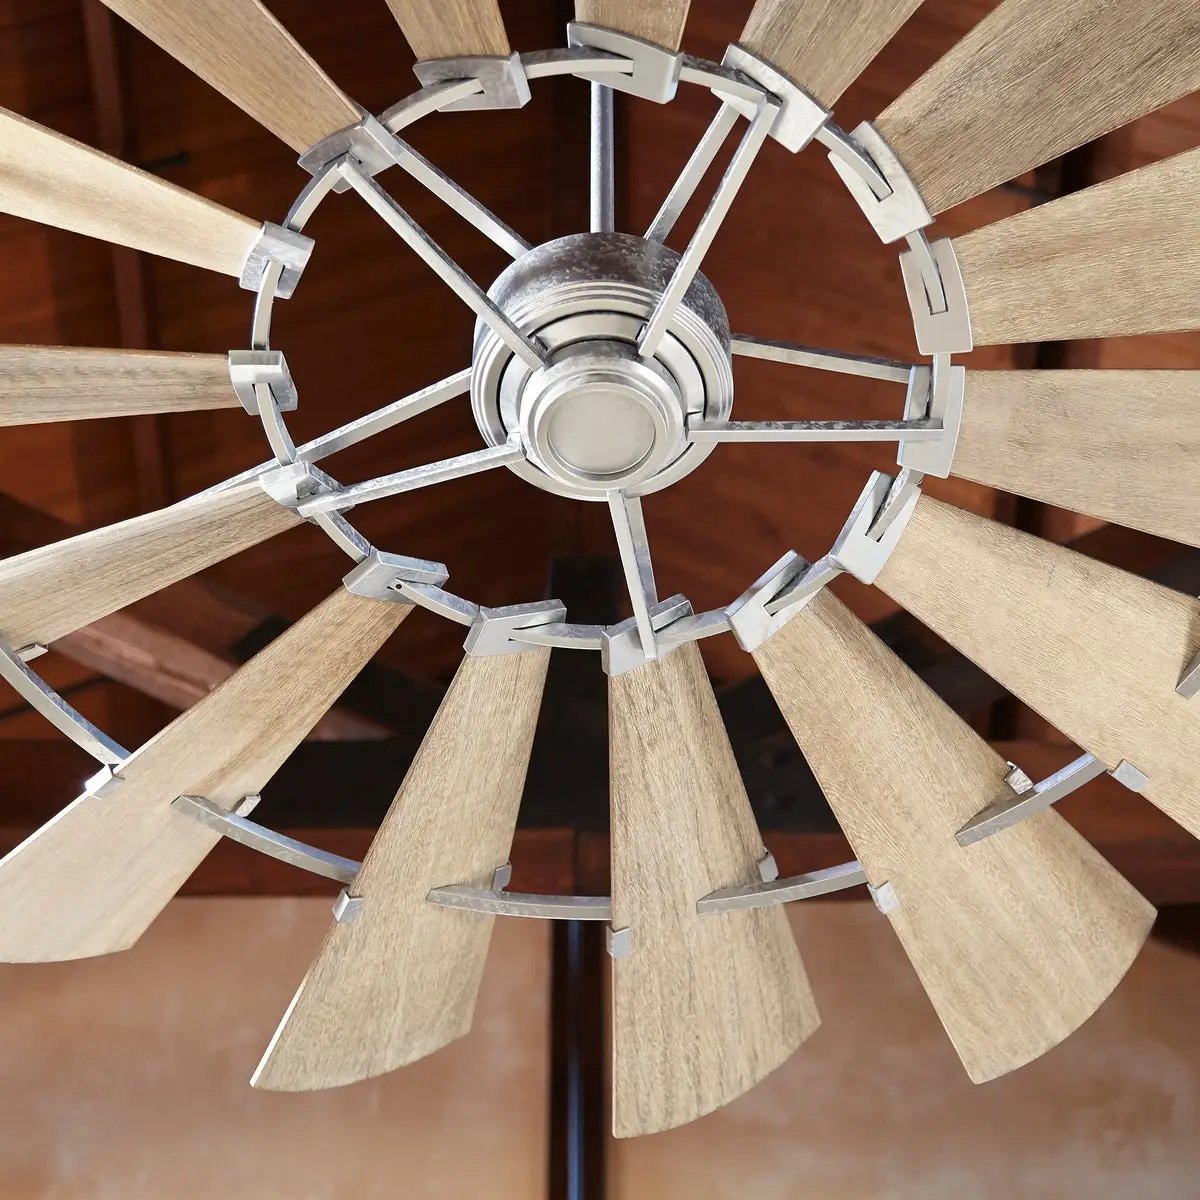 Farmhouse Ceiling Fan with 15 weathered oak wooden blades, rustic design, and windmill-inspired architecture. DC-165L motor, UL Listed, Dry Location safety rating. Dimensions: 16.5"H x 72"W. Limited Lifetime warranty.